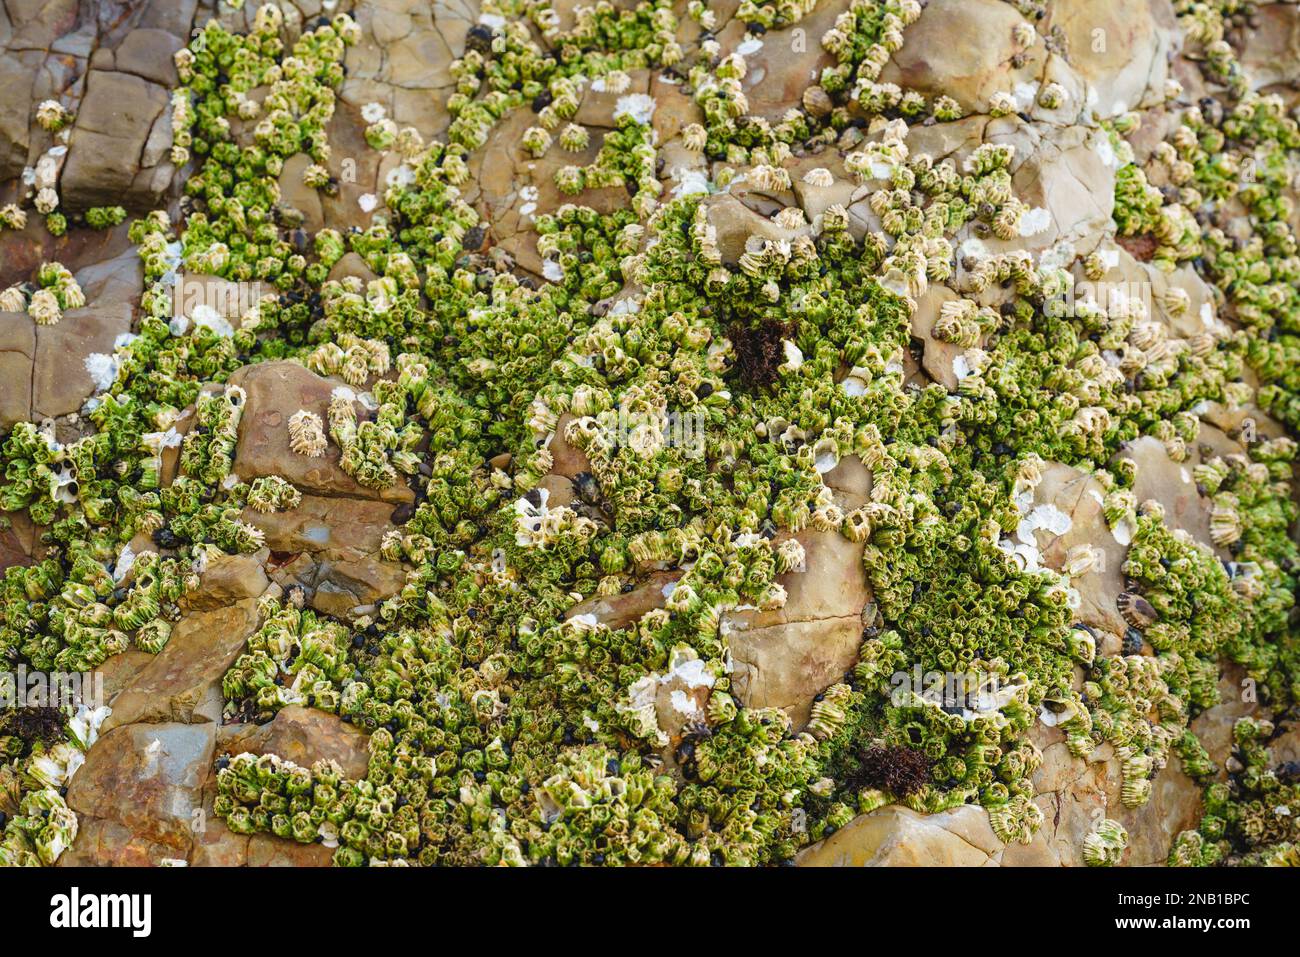 Acorn barnacles, also called rock barnacles, or sessile barnacles,symmetrical shells attached to rocks at Avila Beach, California Stock Photo